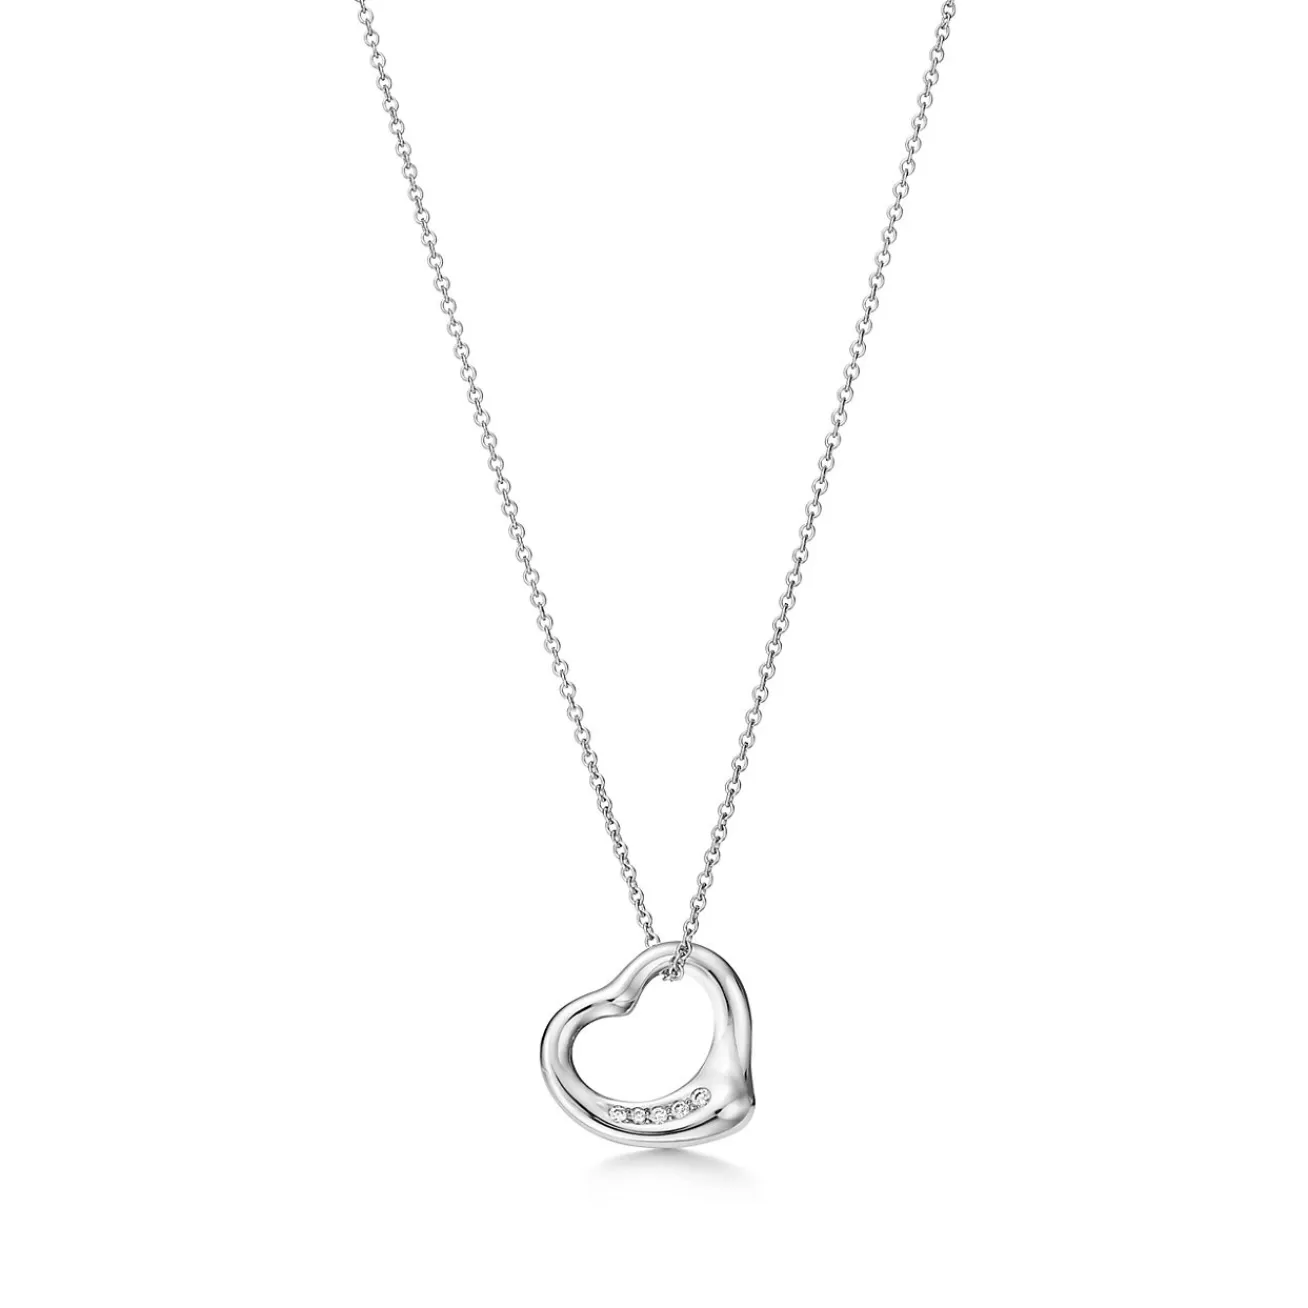 Tiffany & Co. Elsa Peretti® Open Heart pendant in sterling silver with diamonds. | ^ Necklaces & Pendants | Gifts for Her